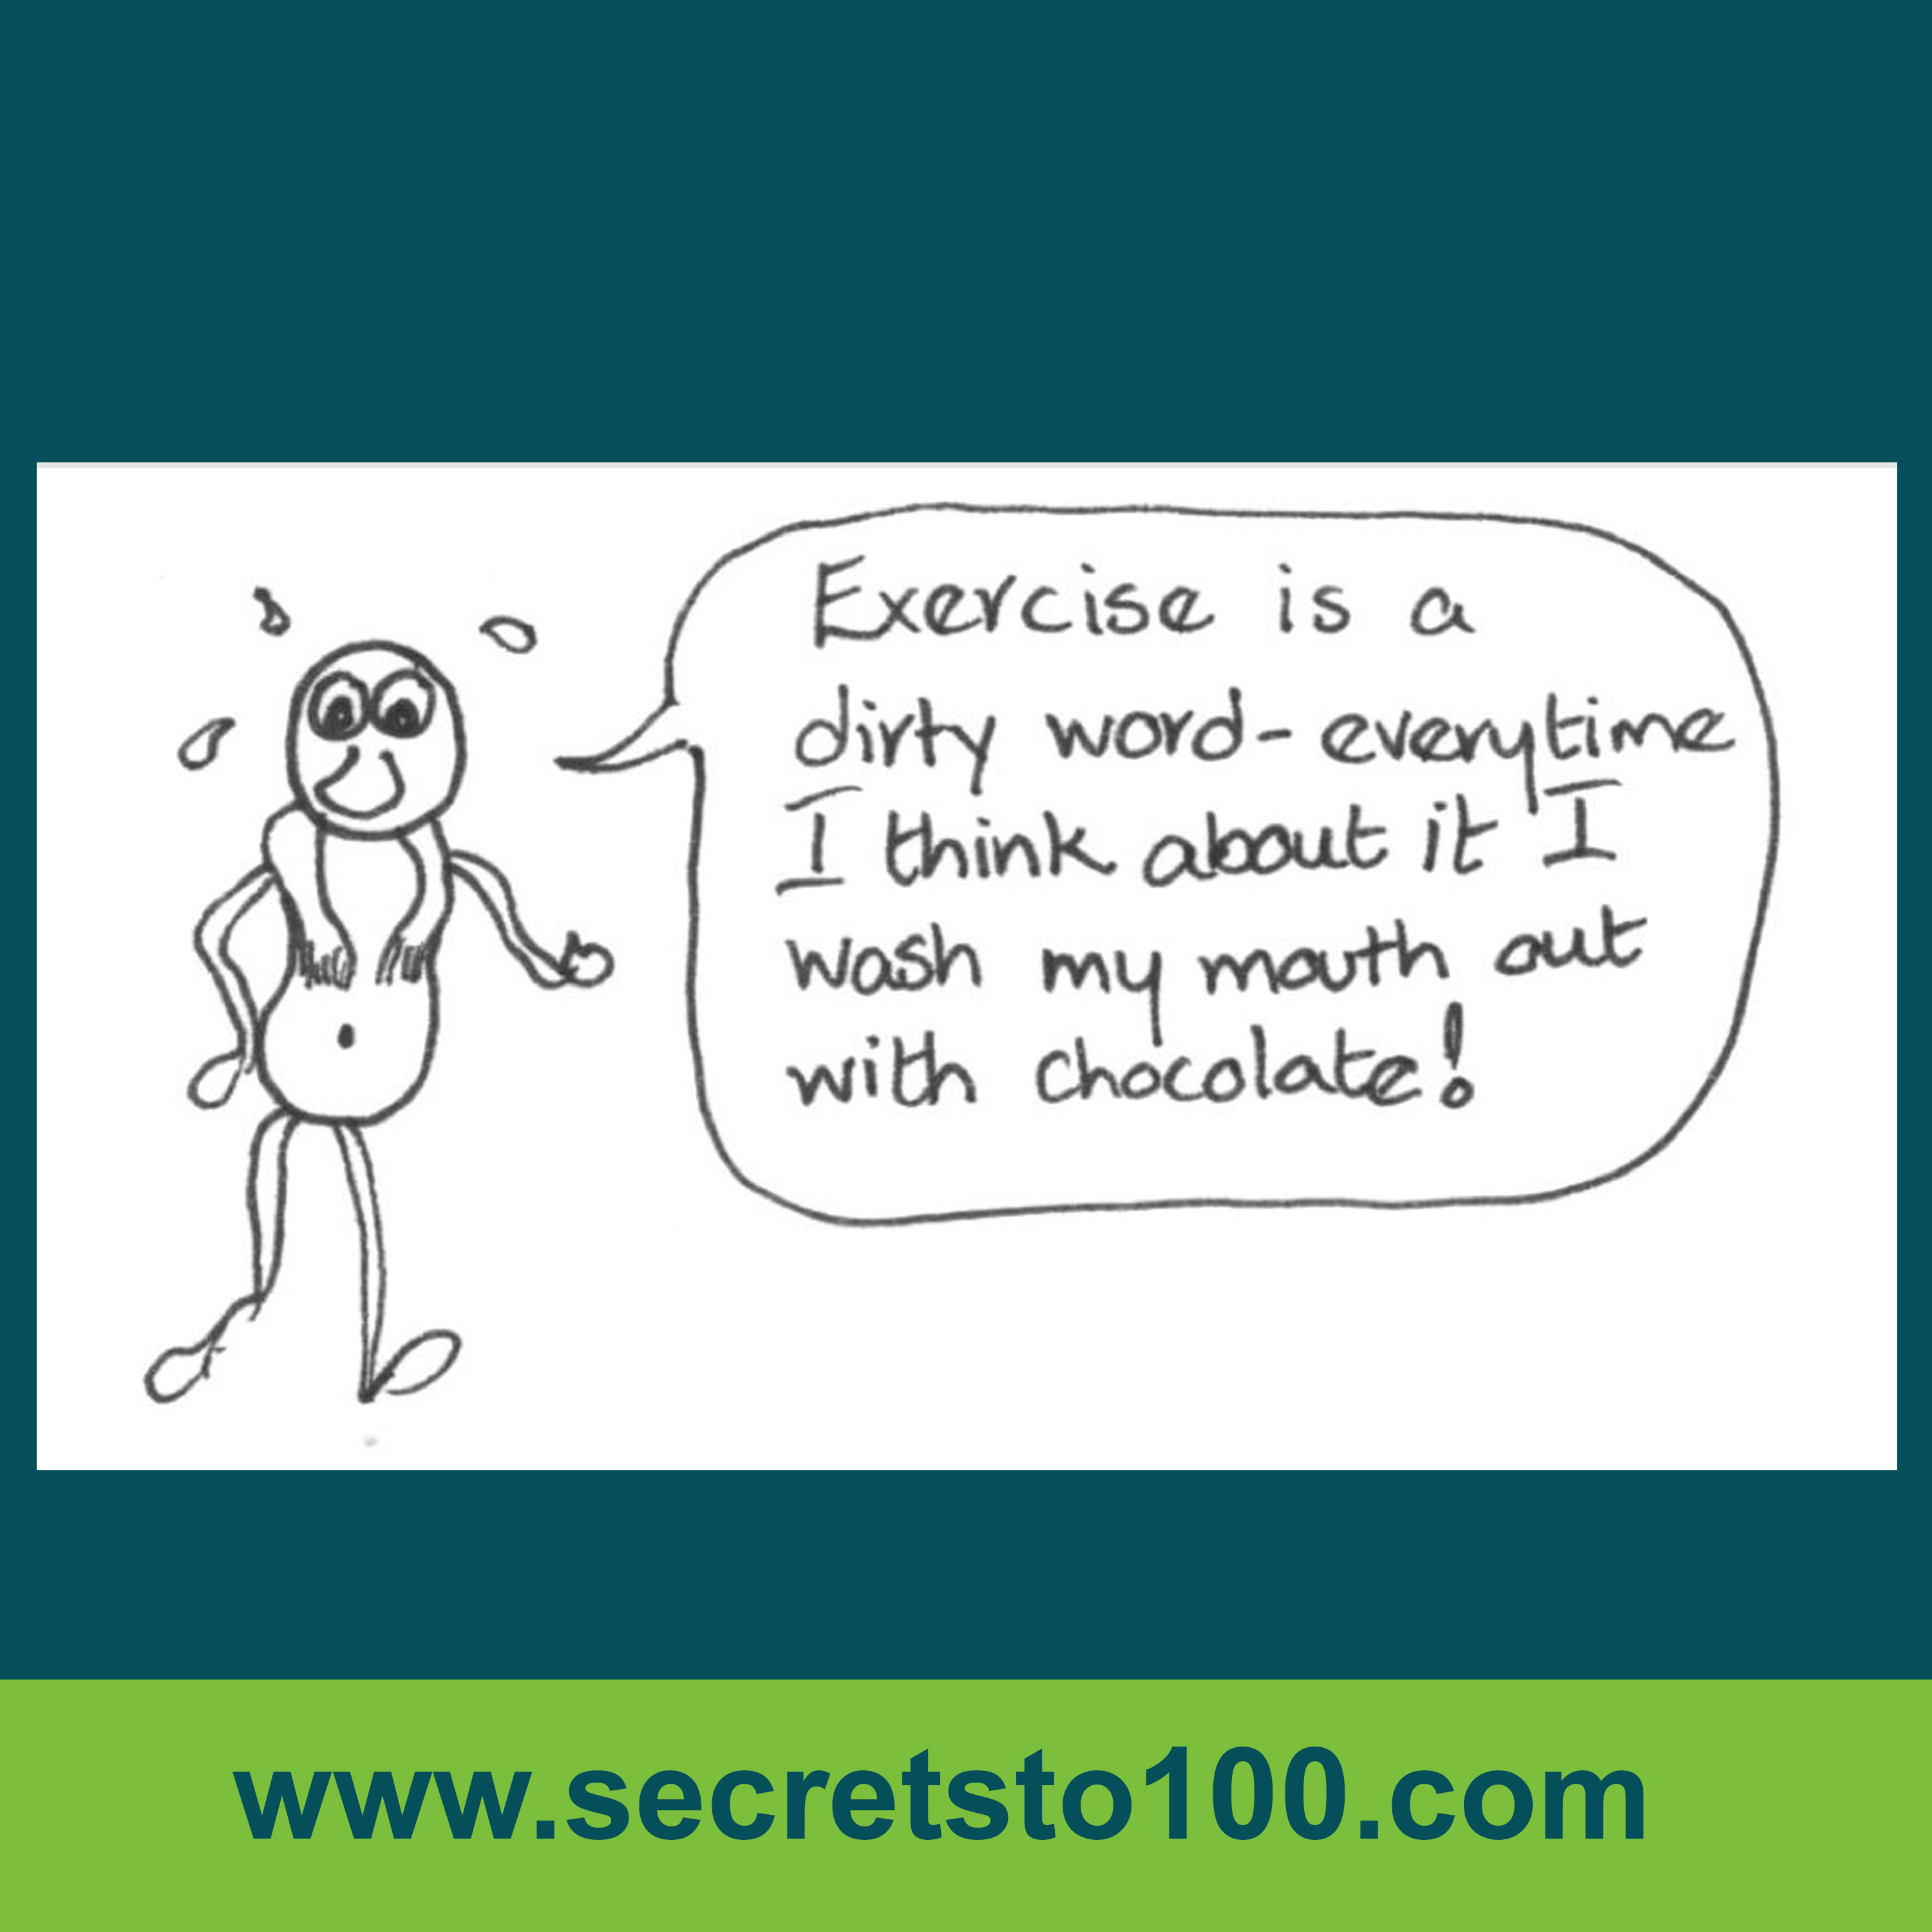 exercise facts, exercise cartoons